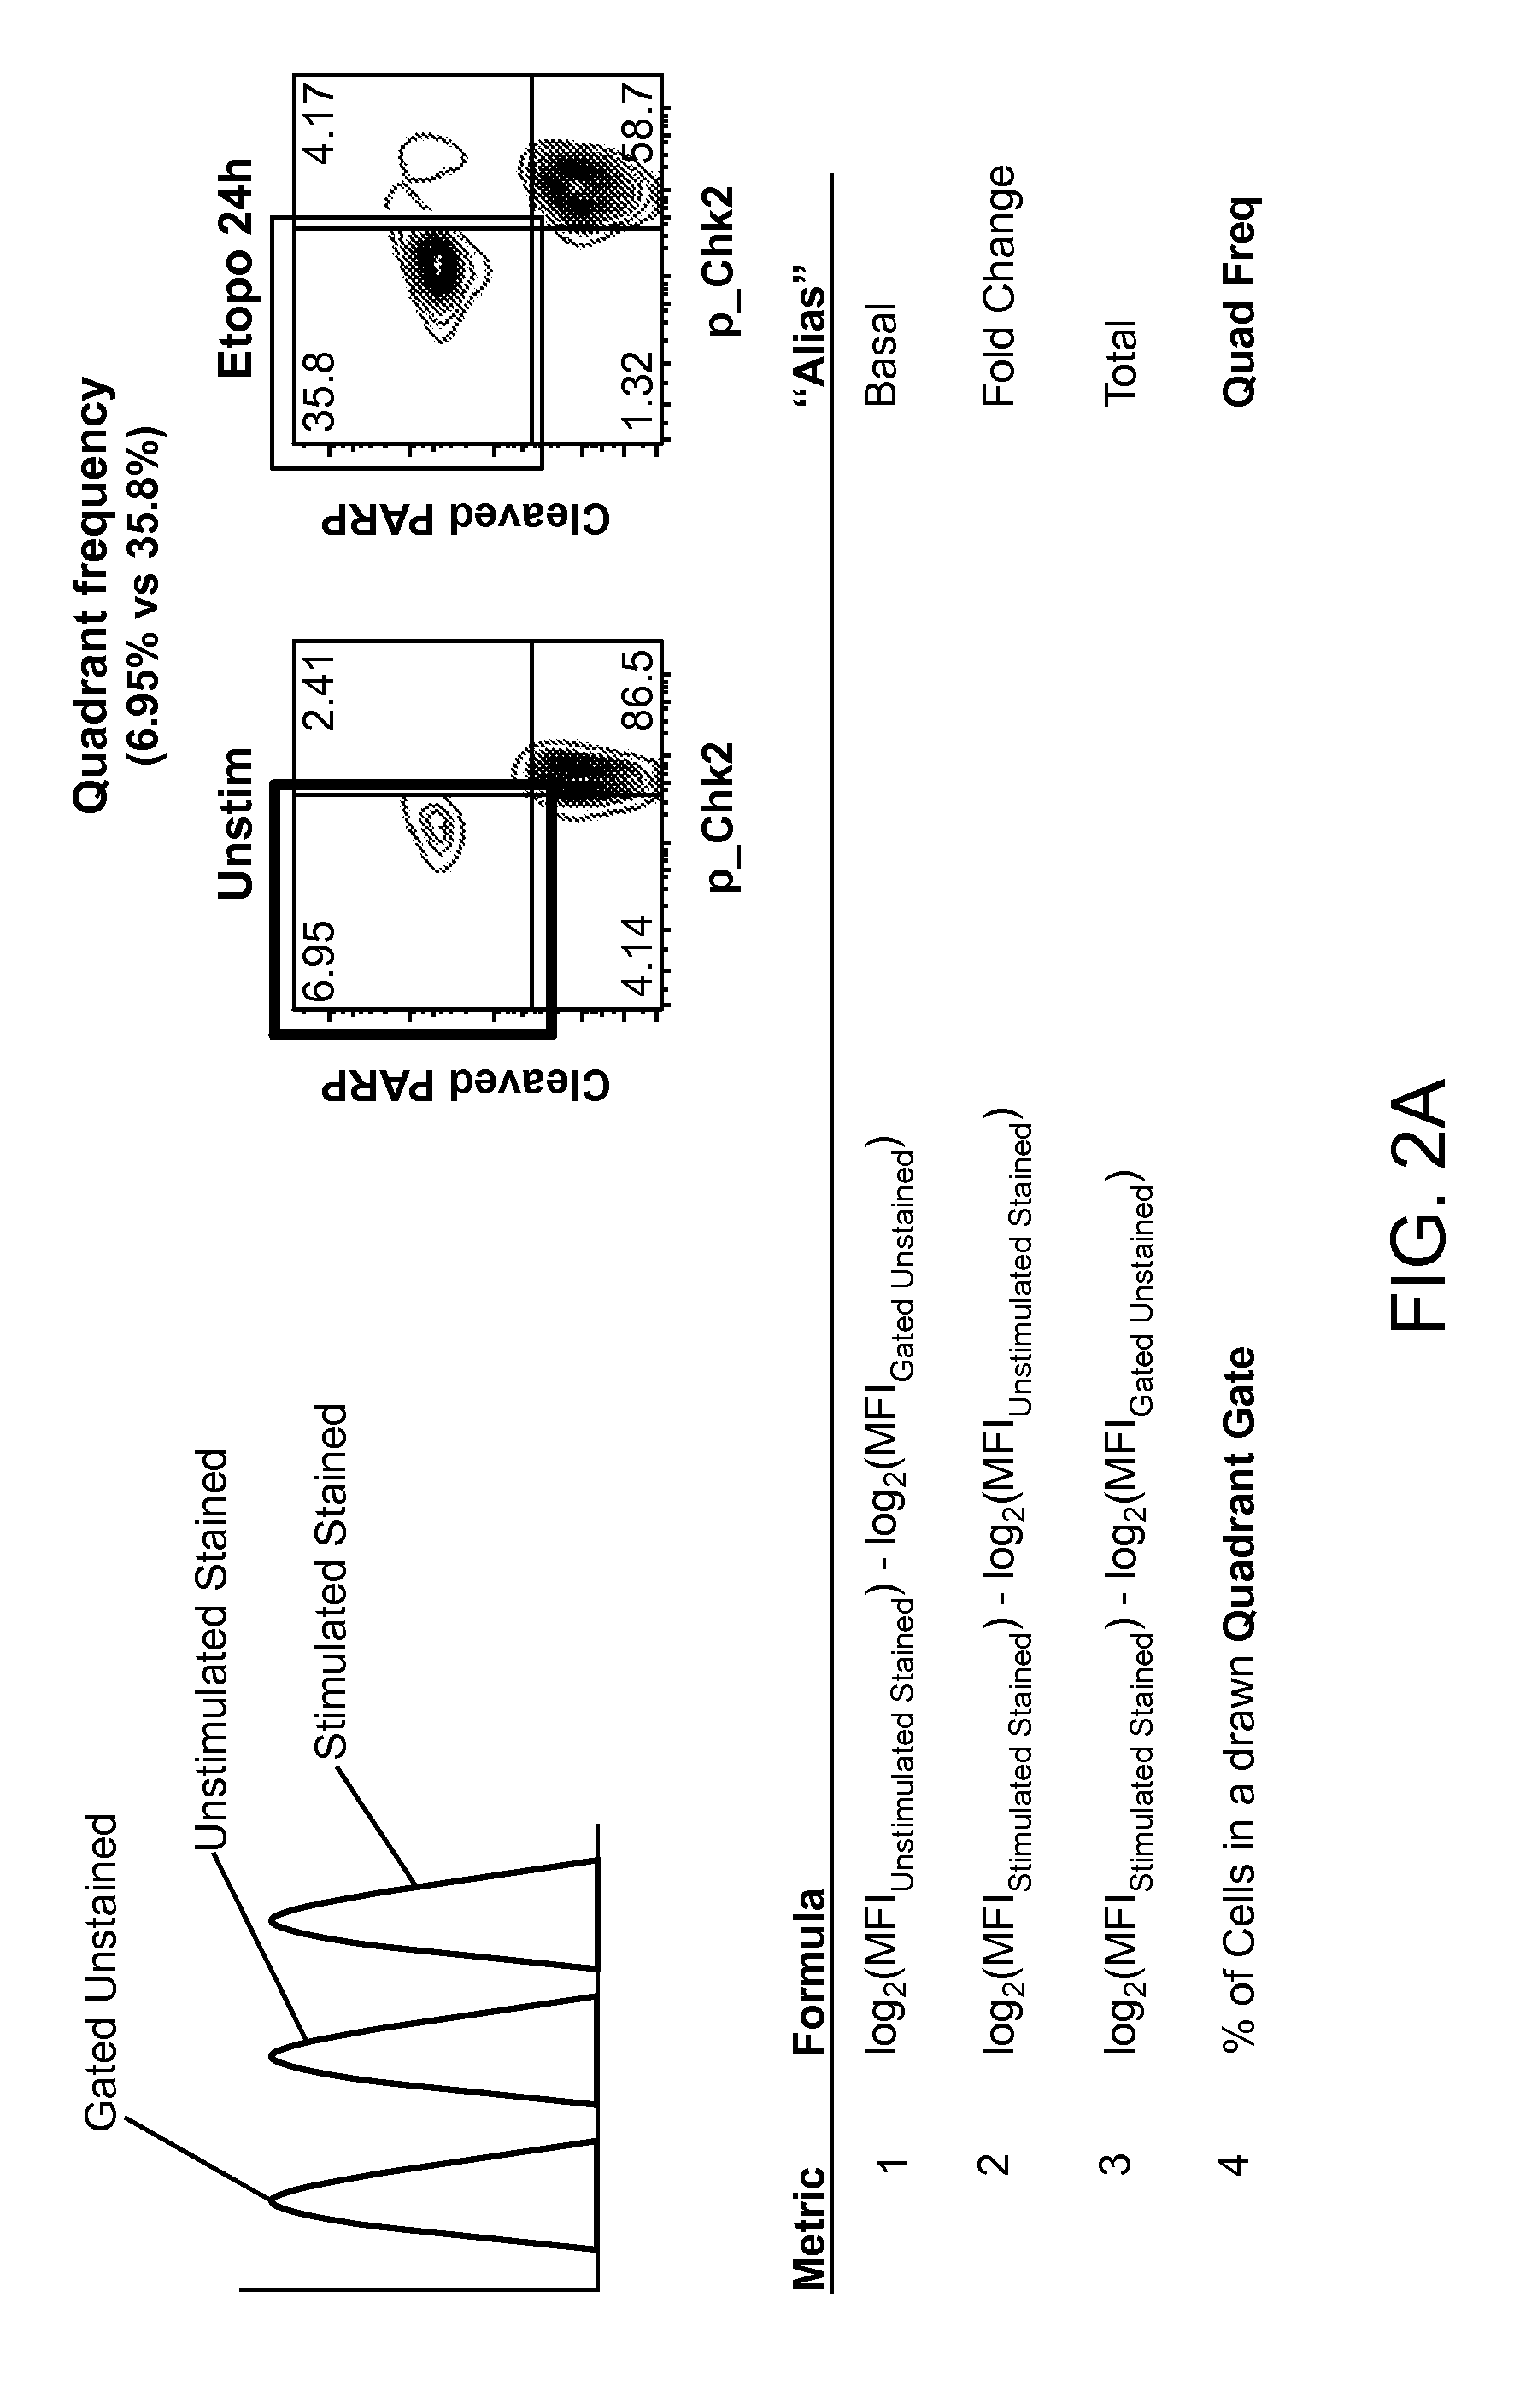 Methods for diagnosis, prognosis and methods of treatment